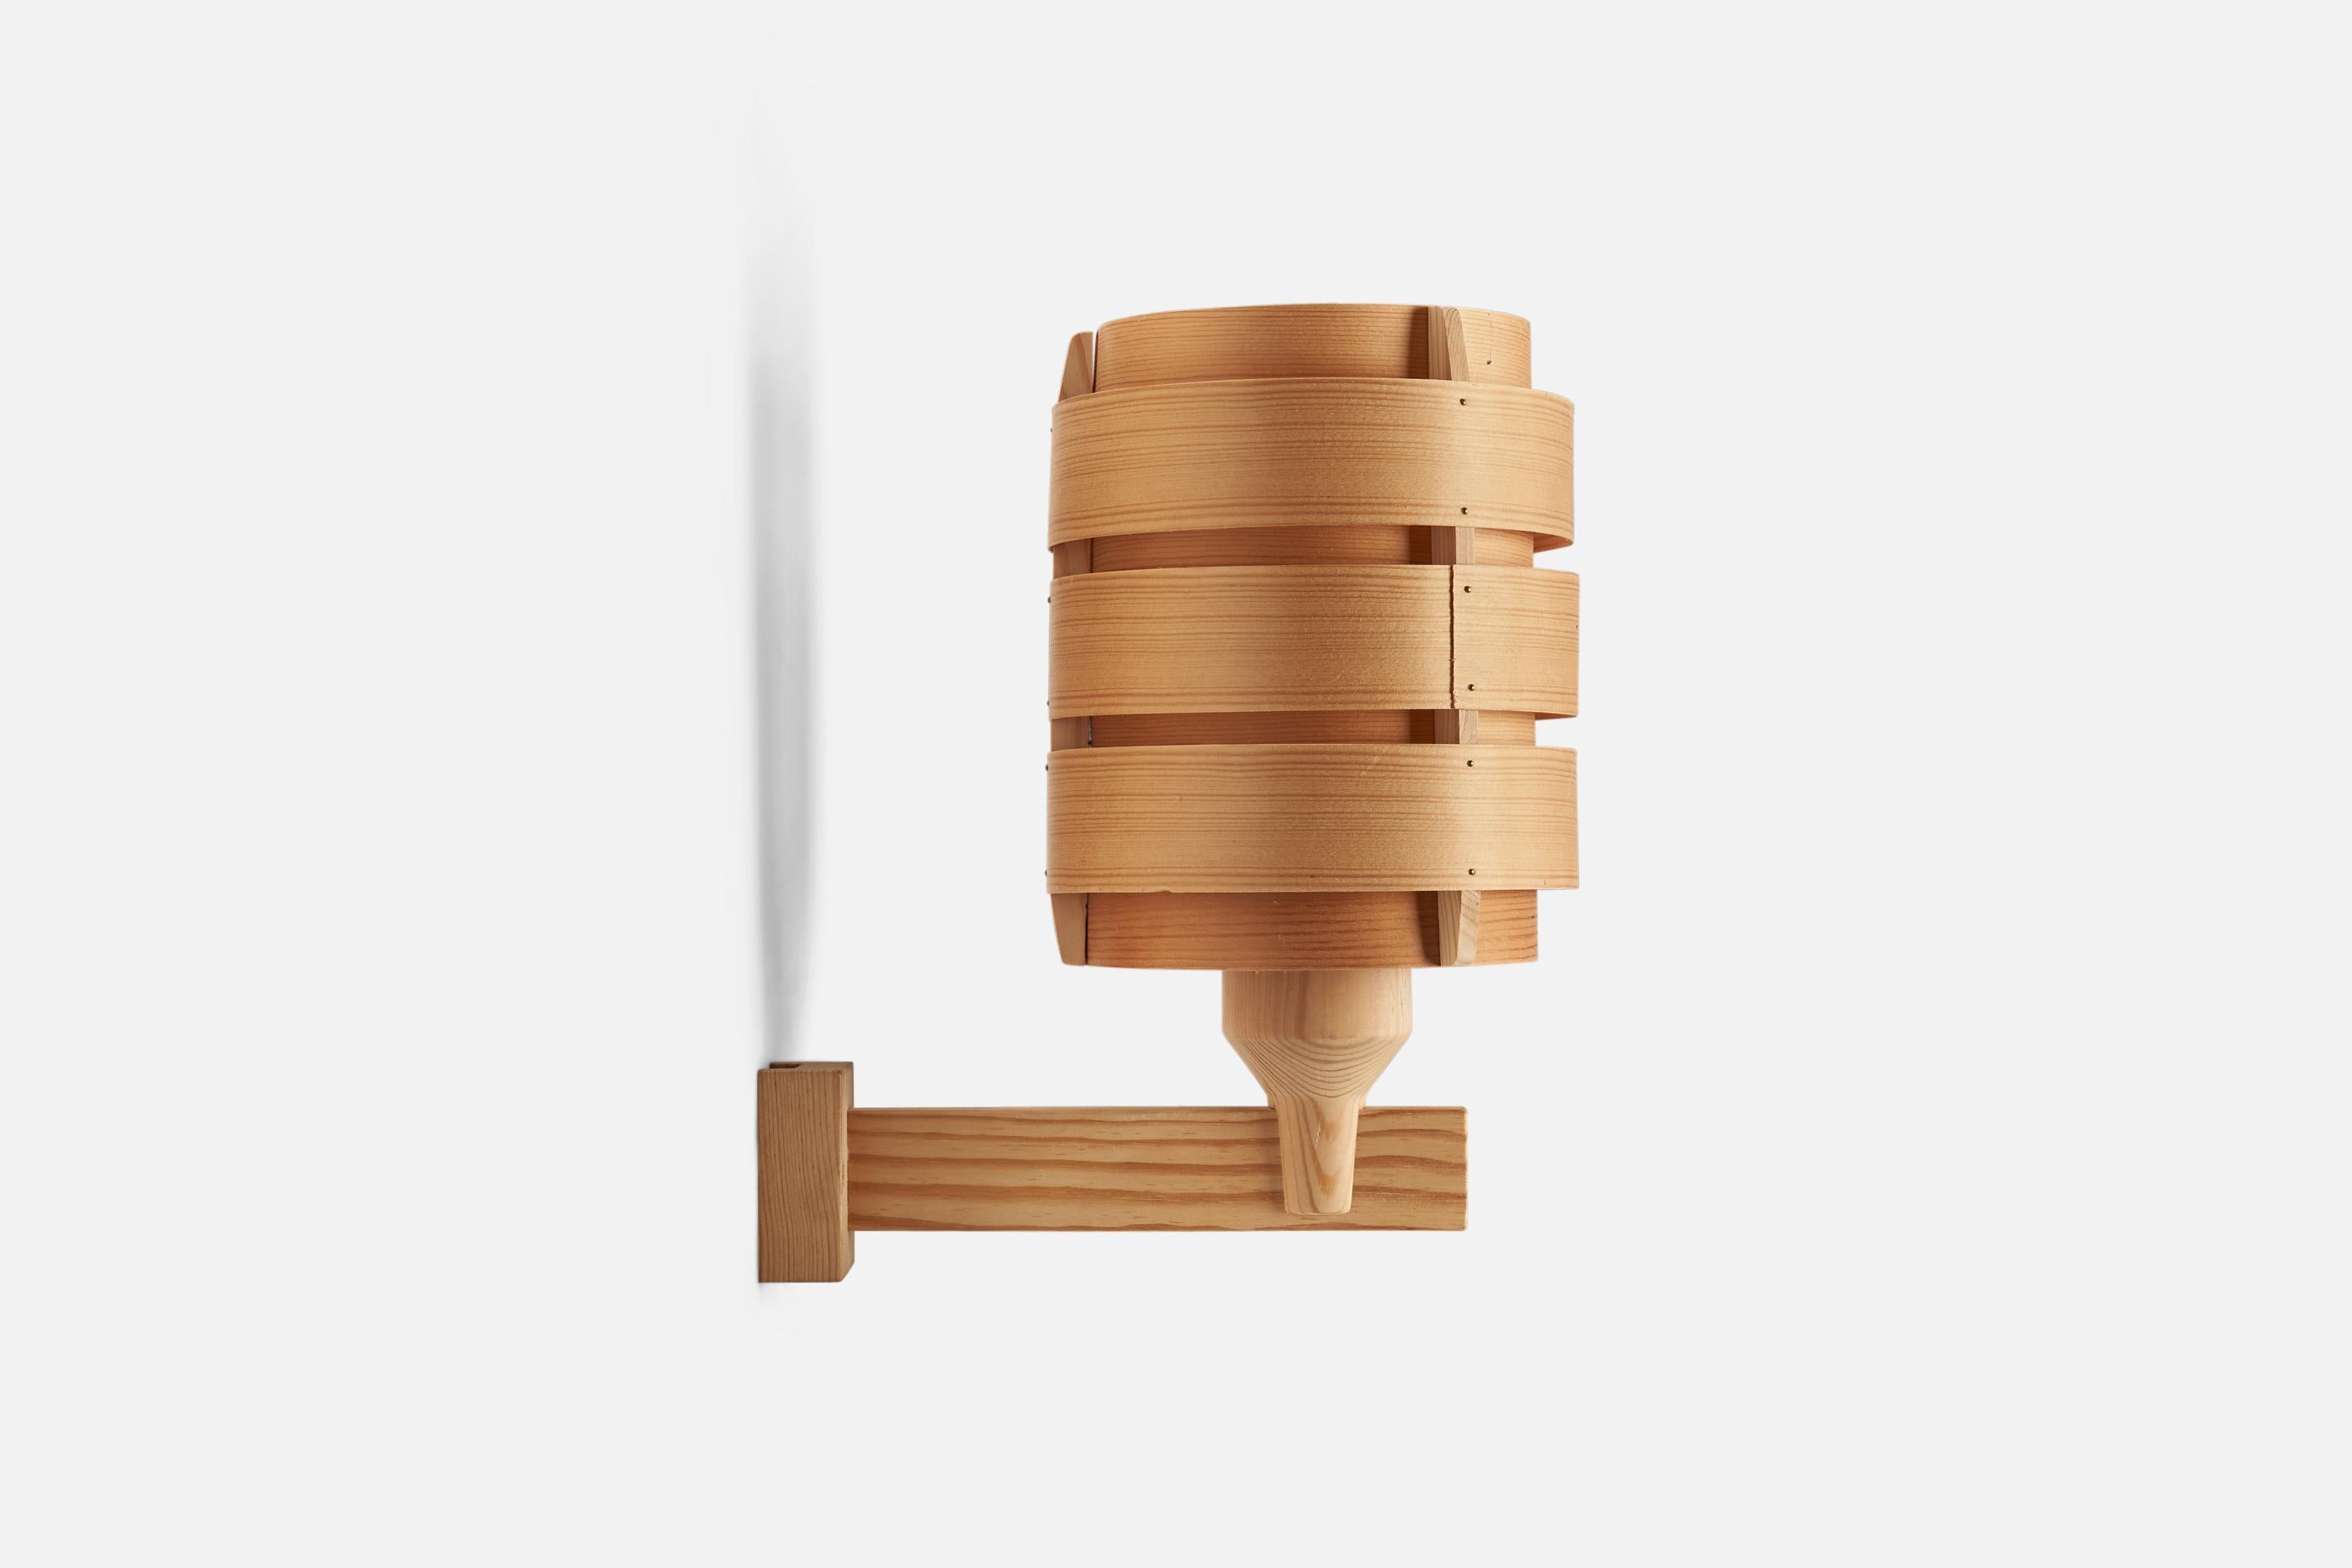 A pine wall light designed by Hans-Agne Jakobsson and produced by Elysett AB, Sweden, 1970s.

Dimensions of back plate (inches) : 2.3 x 2.2 x 0.9 (Height x Width x Depth)

Socket takes standard E-26 medium base bulb.

There is no maximum